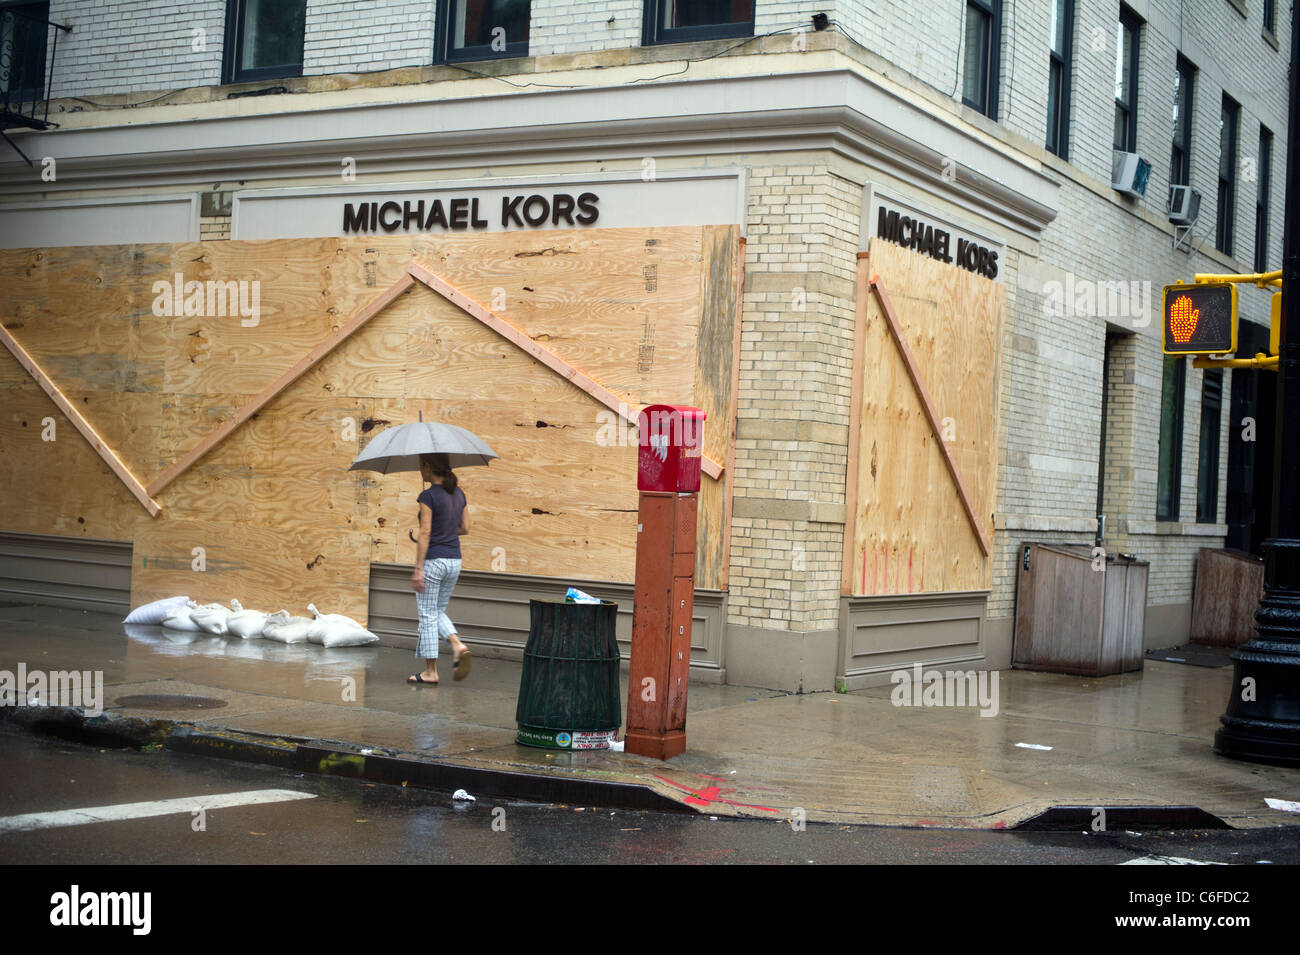 The Michael Kors store sandbags the doors and covers the windows with plywood as protection against Hurricane Irene Stock Photo